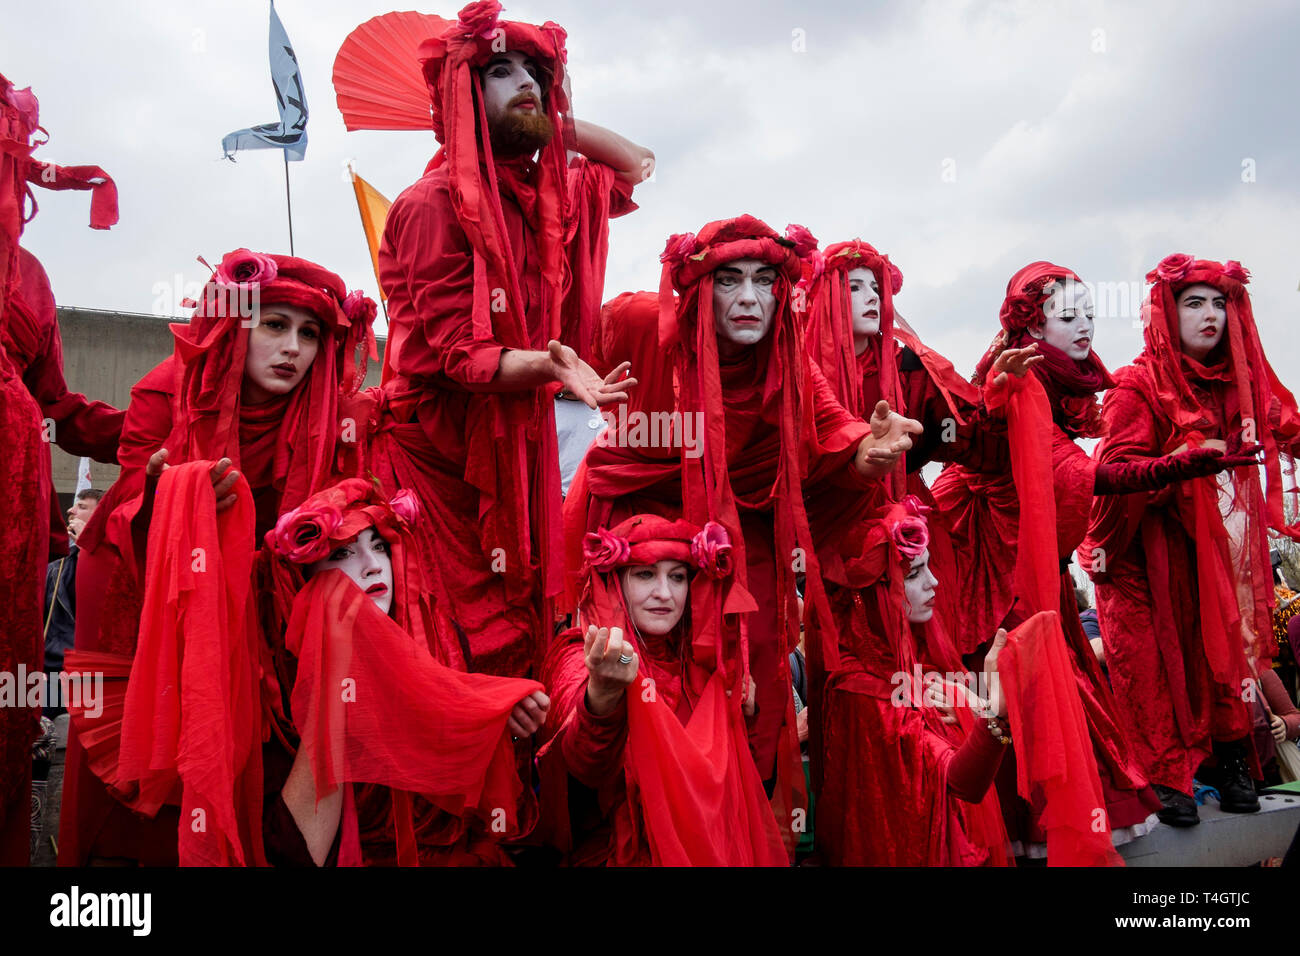 Extinction Rebellion environmental activists occupy Waterloo Bridge, London. Performance group Invisible Circus participate in the protest. Stock Photo